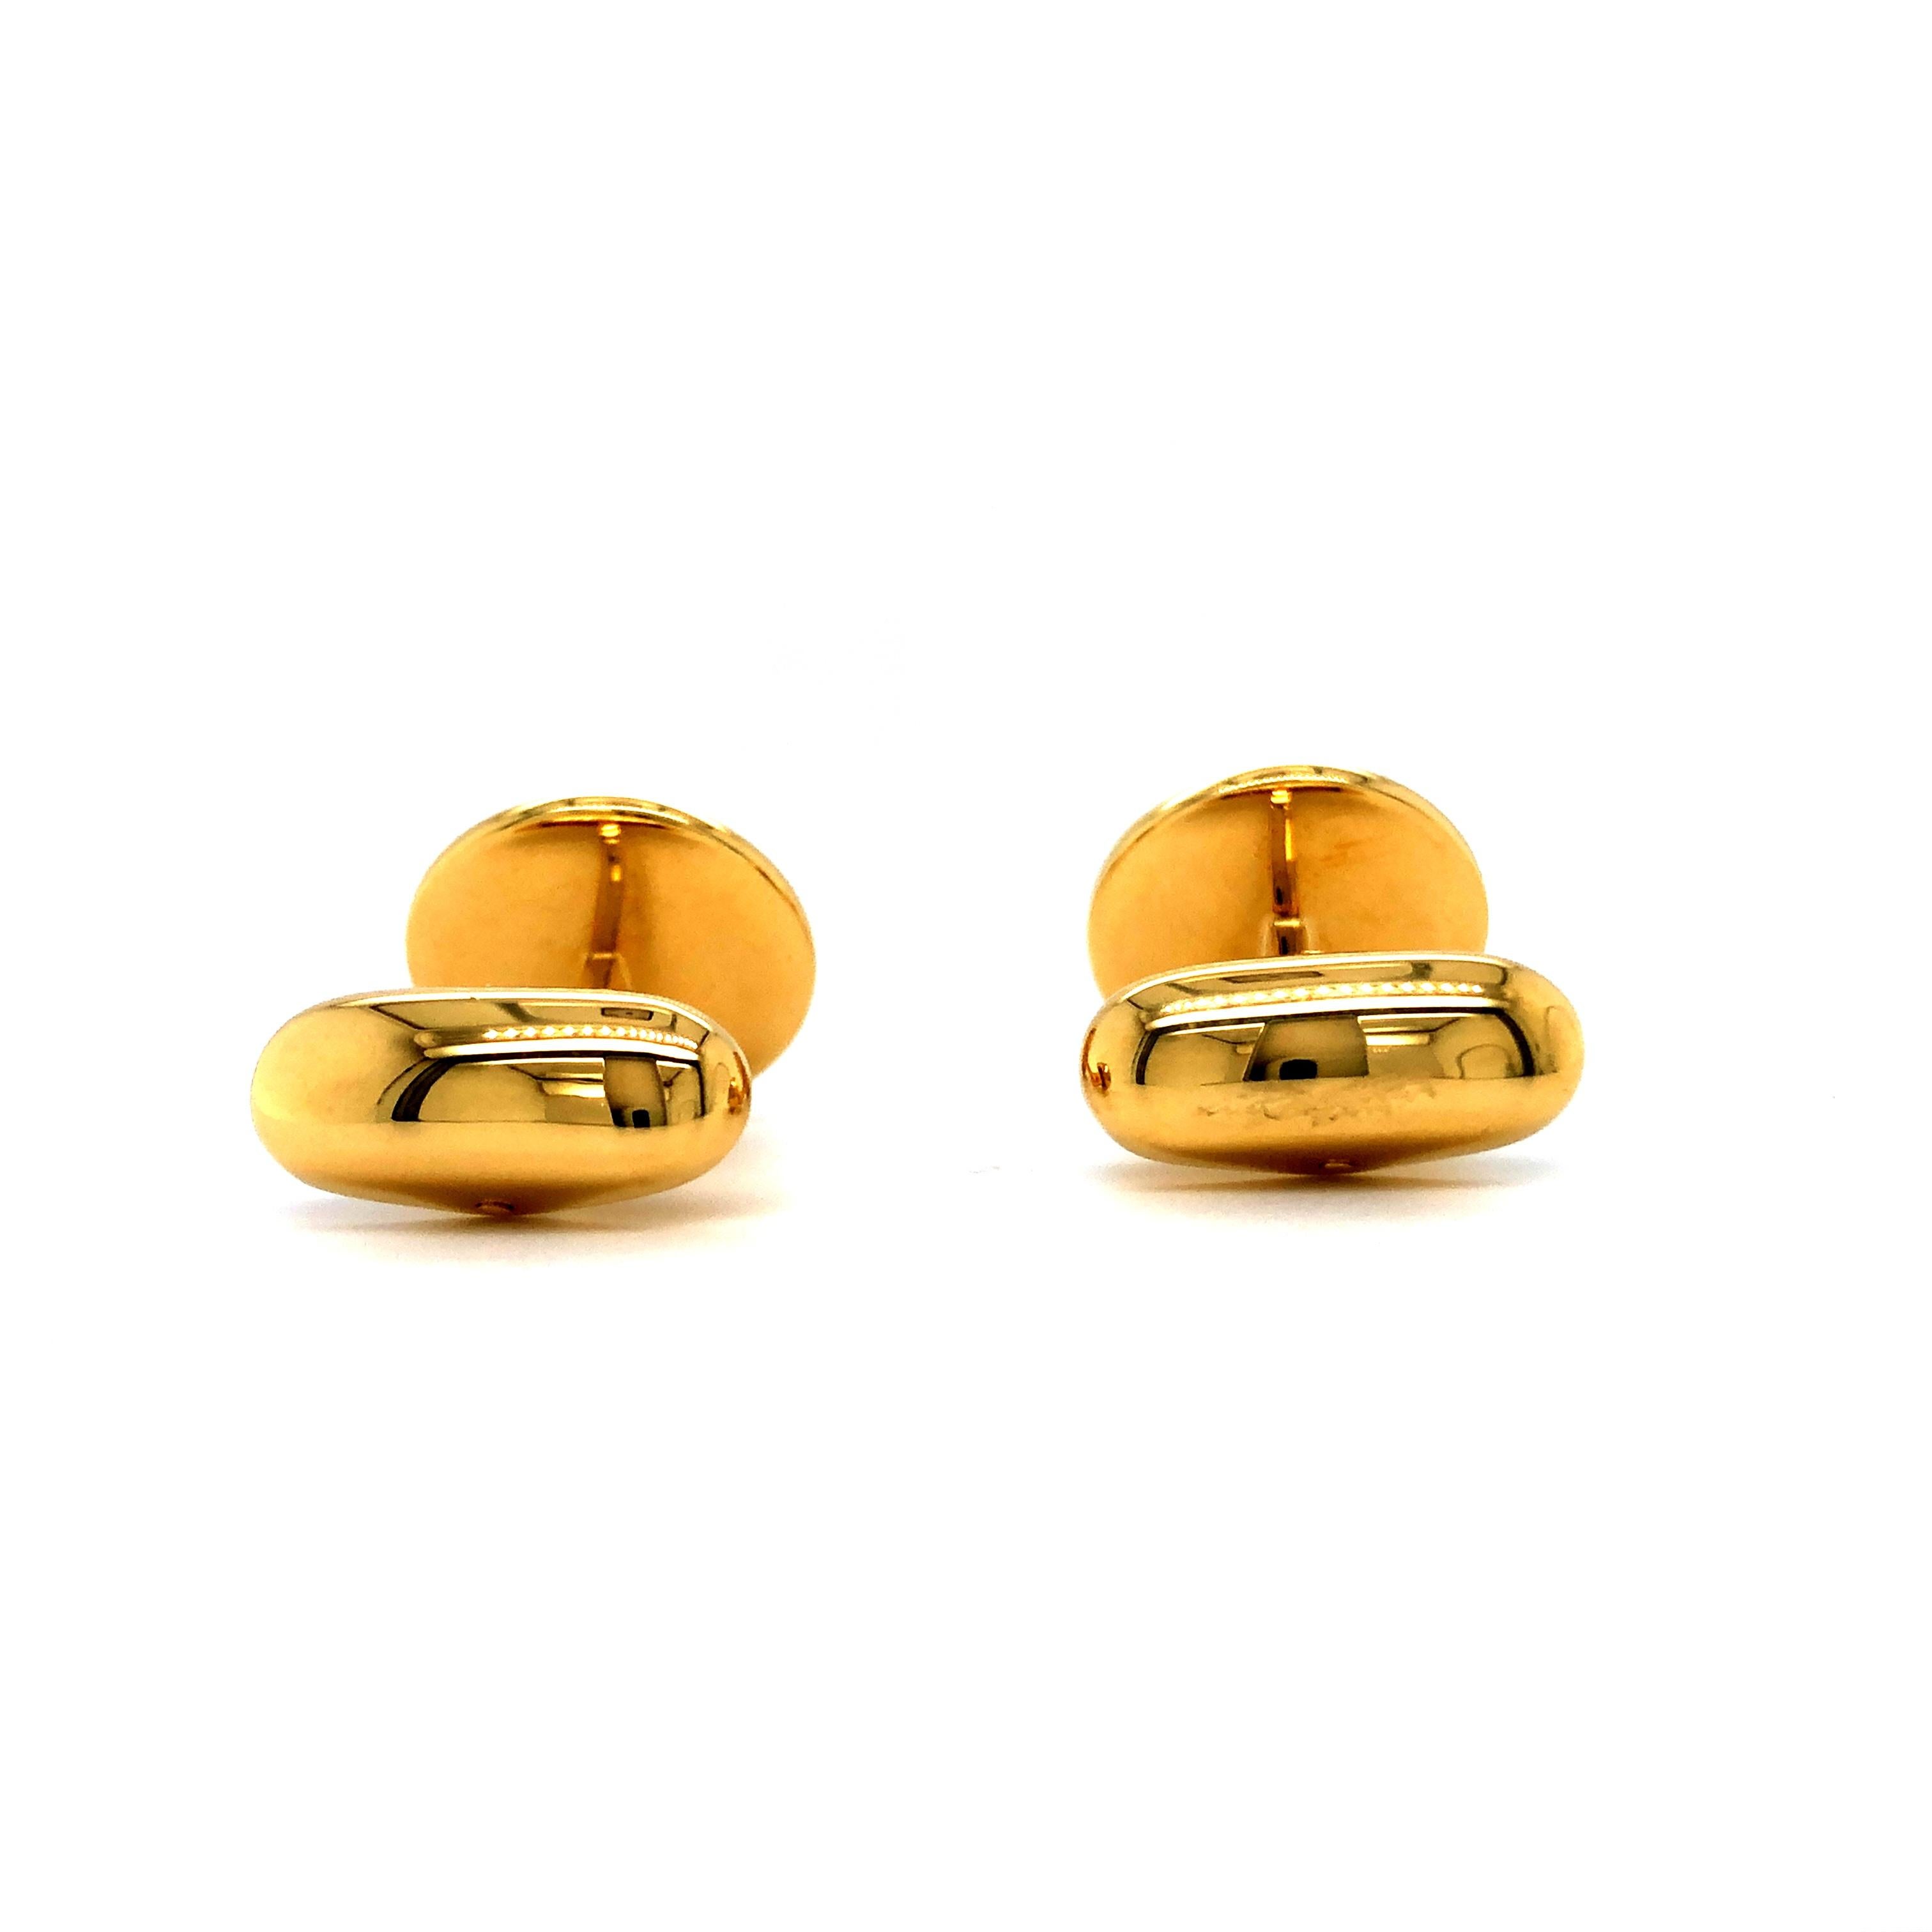 Contemporary Round Cufflinks with Domed Bezel, 18k Yellow Gold, Onyx Inlays For Sale